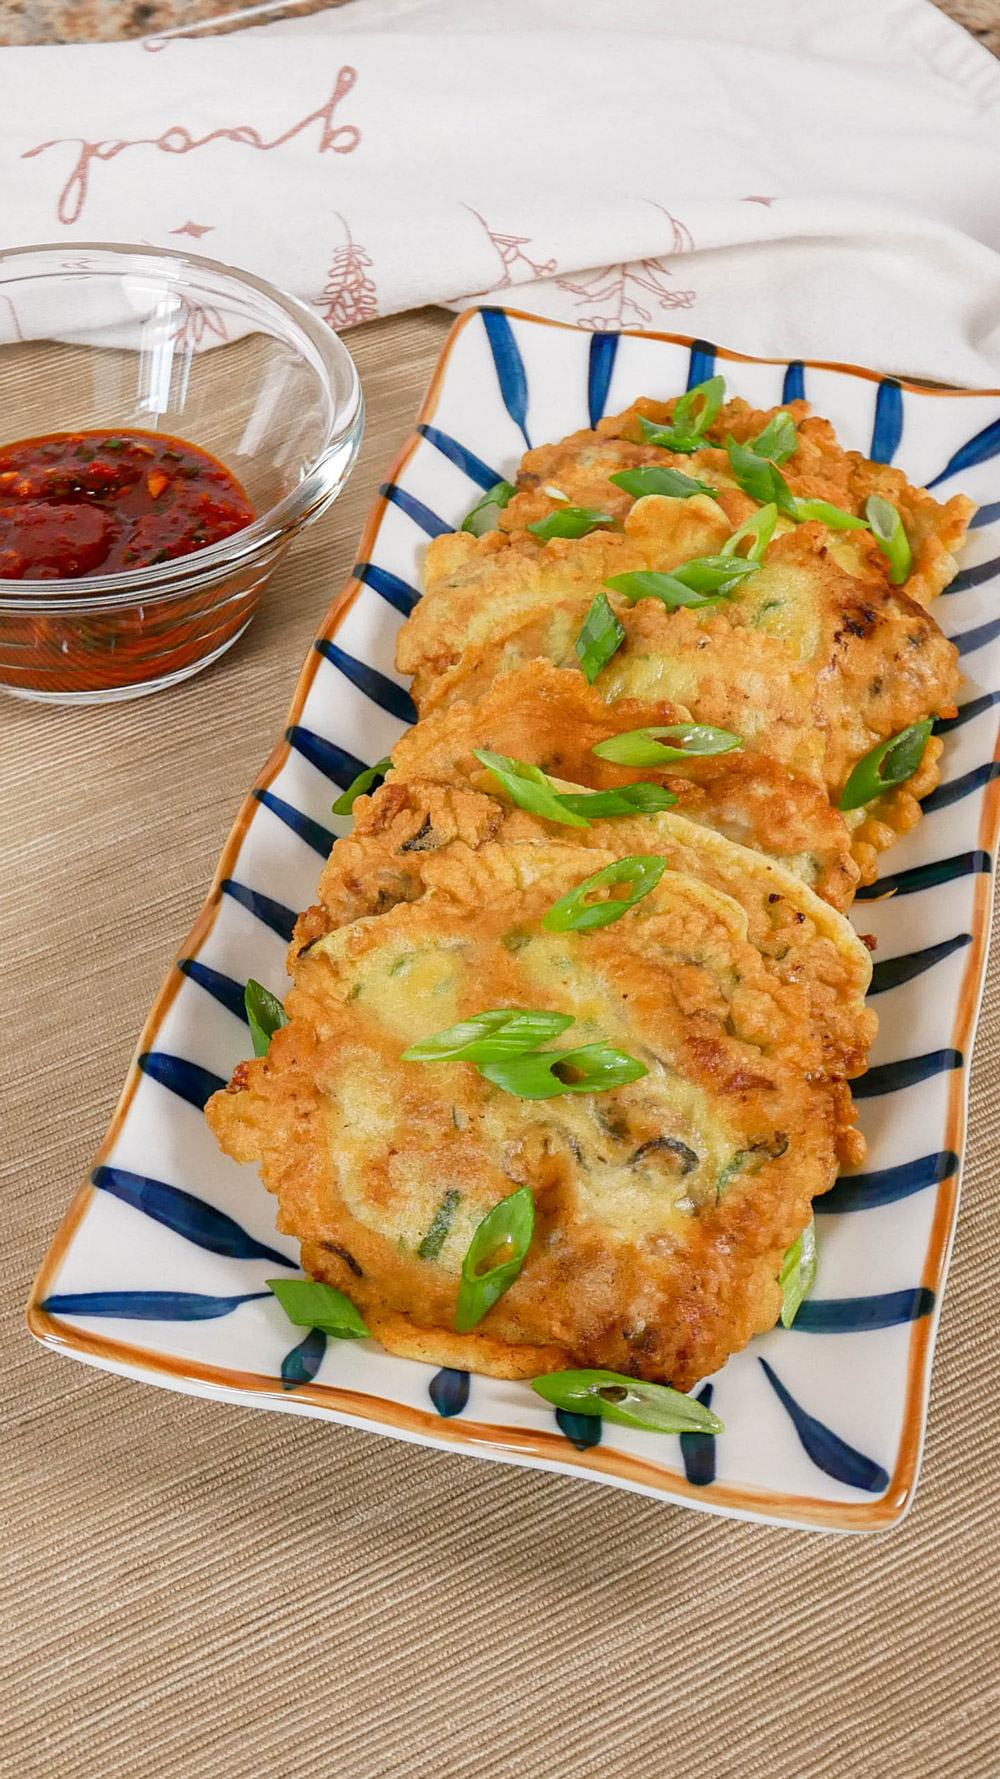 korean style oyster pancake also known as gul jeon plated on a cutting board